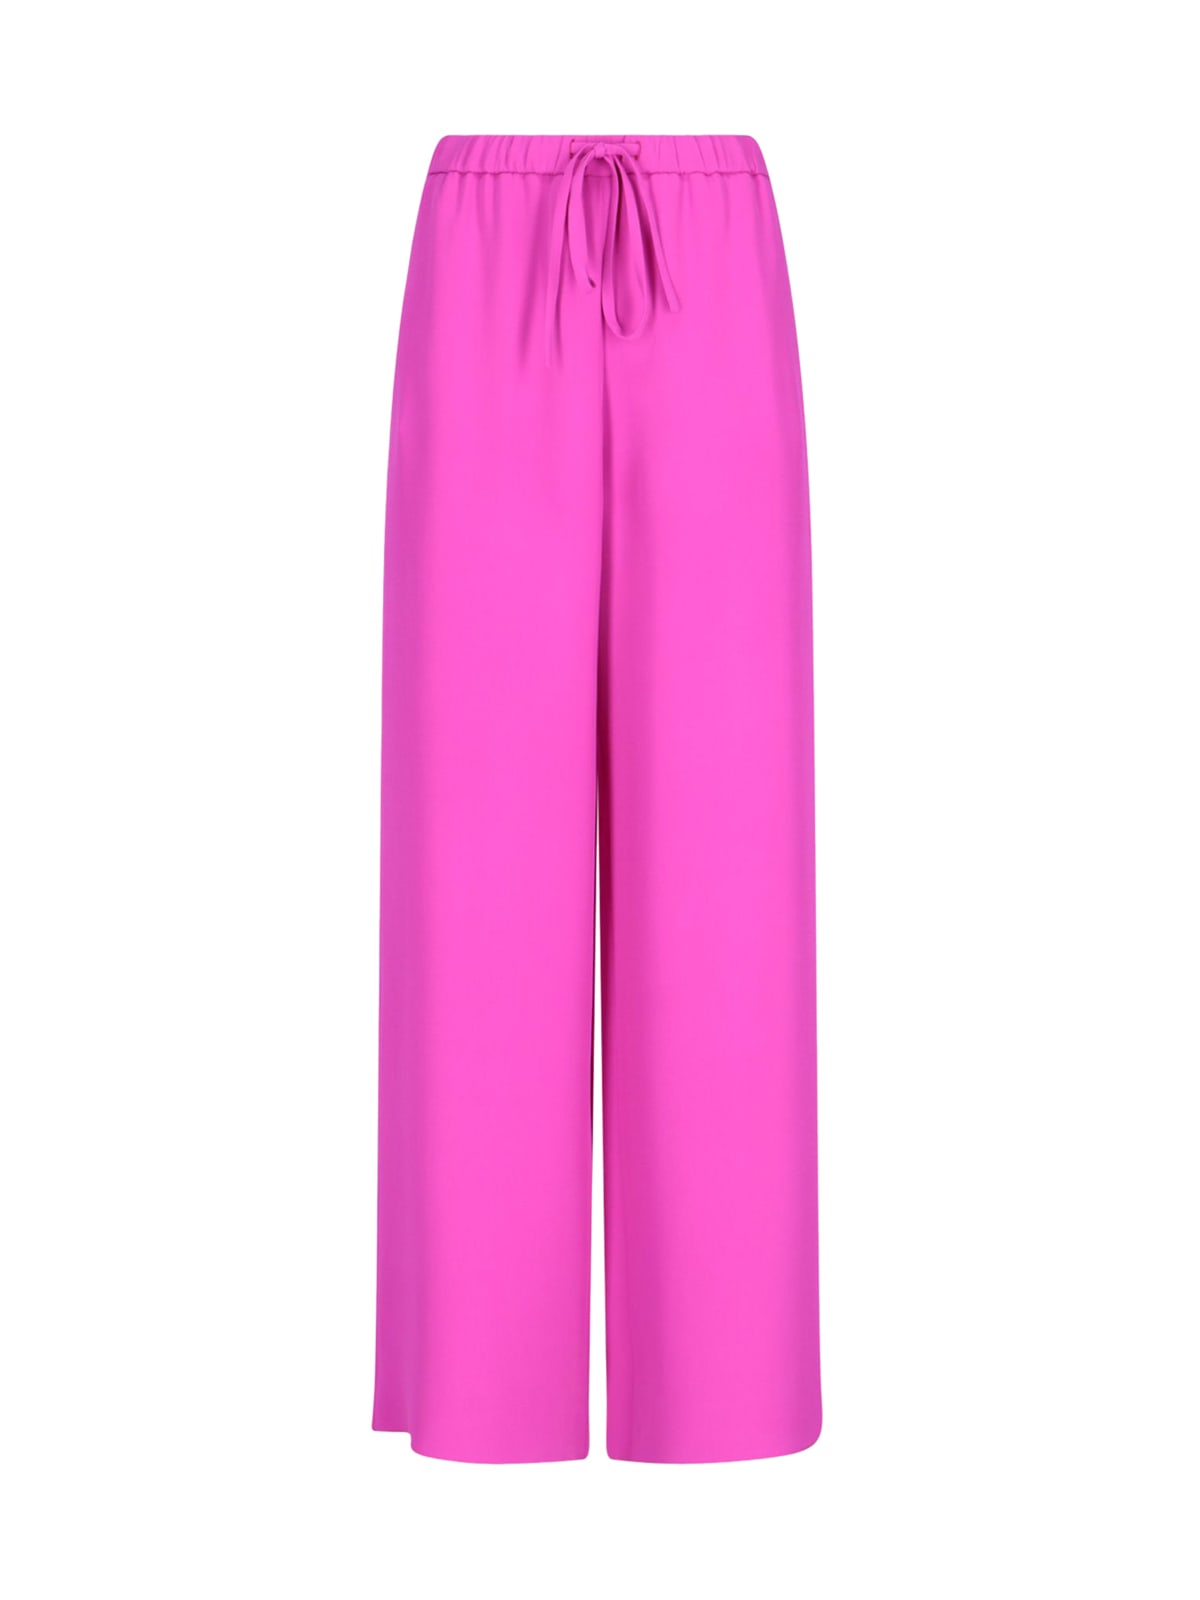 Valentino Cady Couture Pants